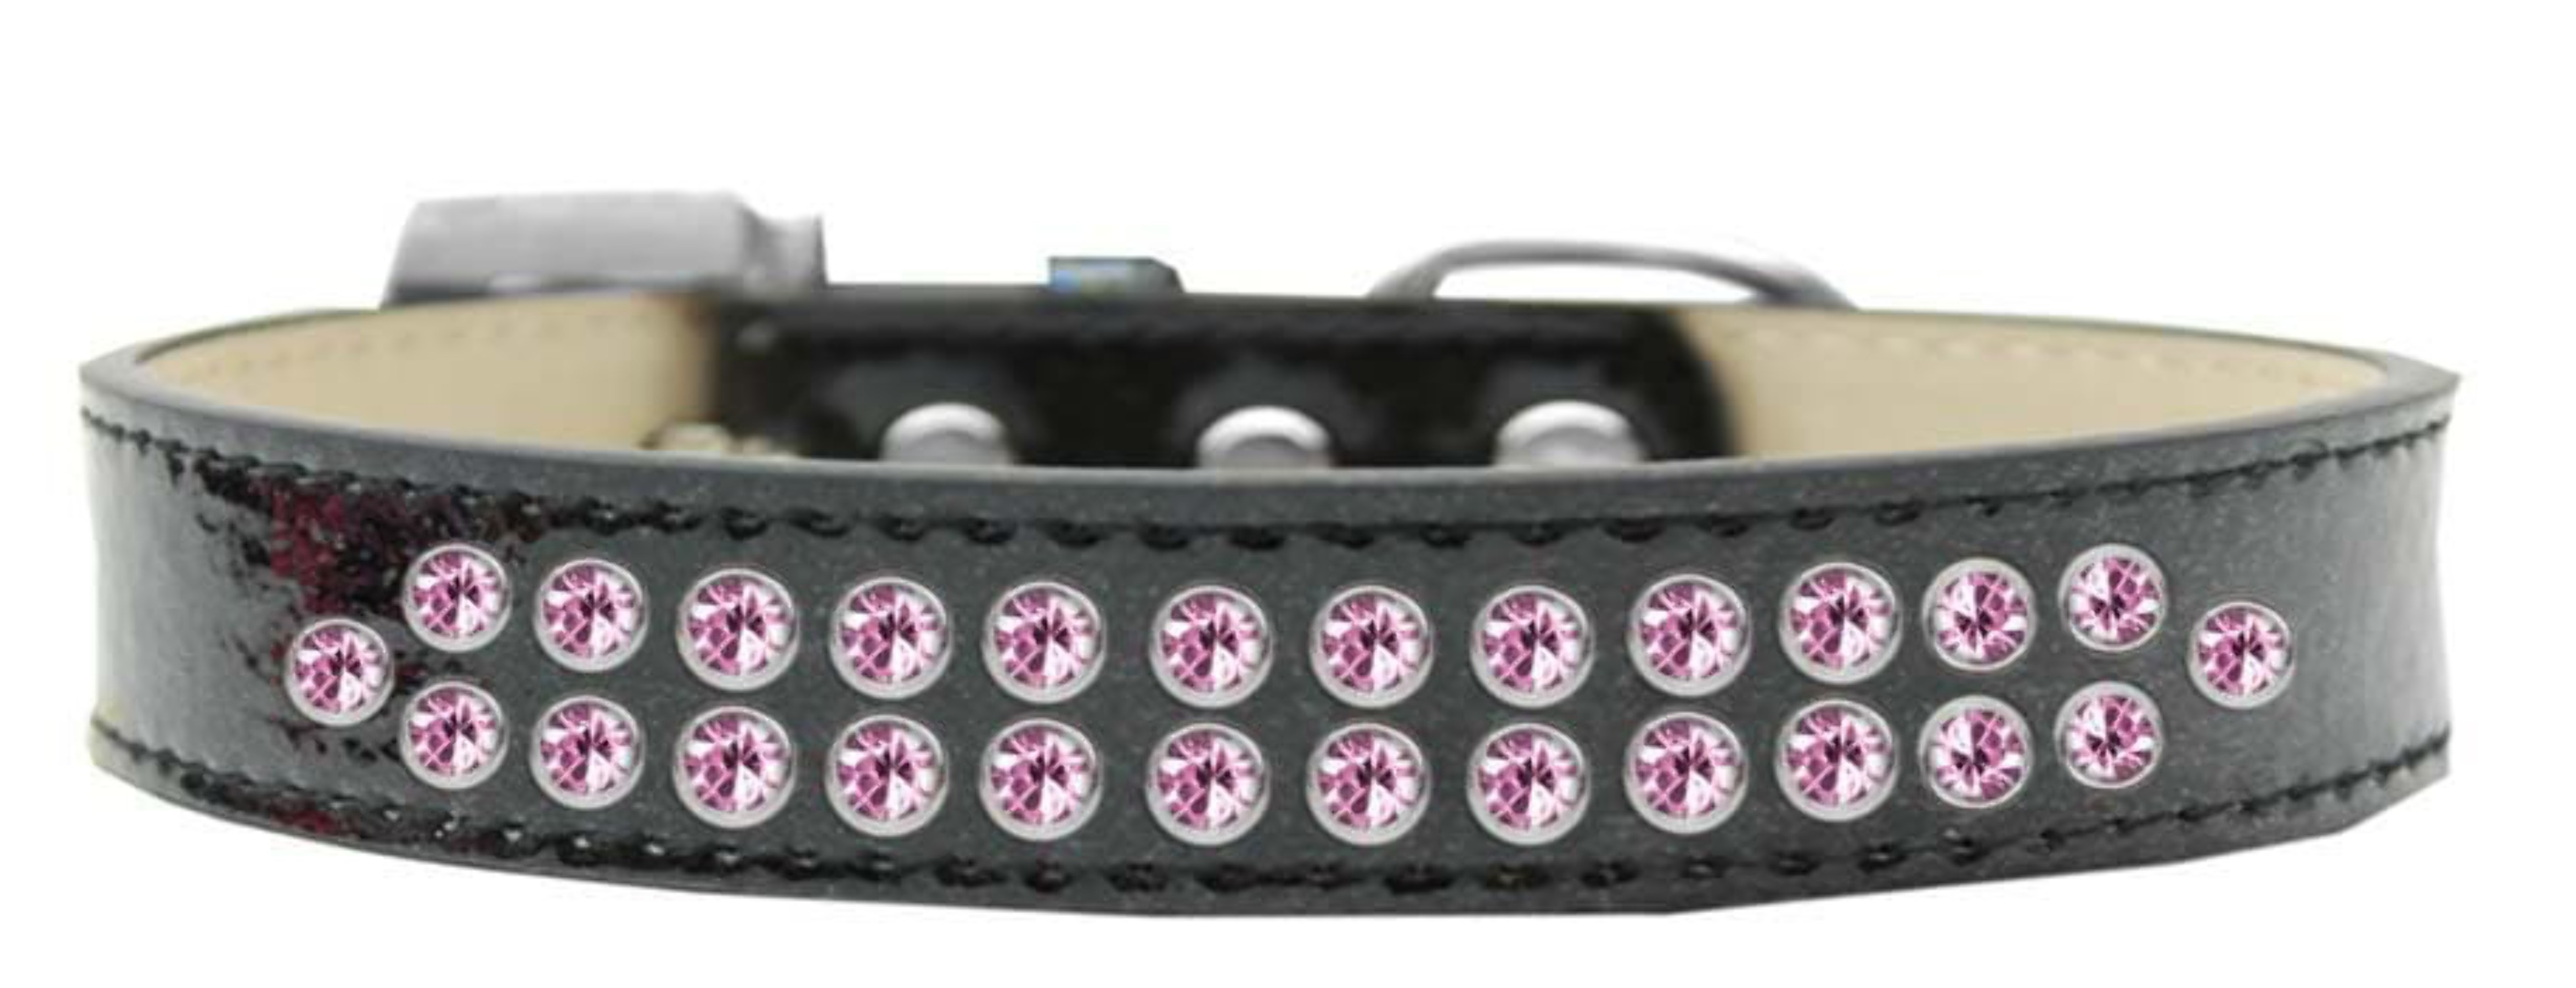 Mirage Pet Products614-06 PK-12 Two Row Light Pink Crystal Dog Collar, Pink Ice Cream - Size 12 - image 3 of 5